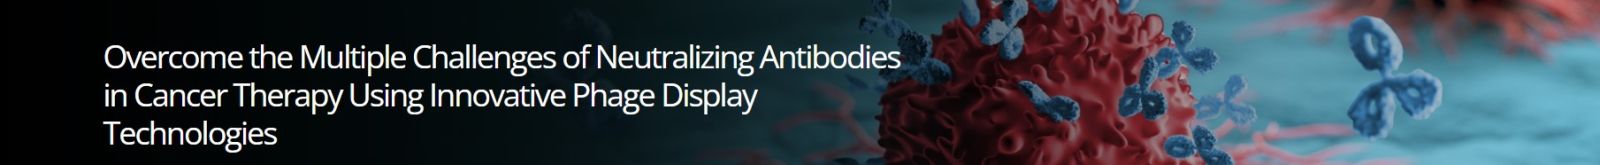 Overcome the Multiple Challenges of Neutralizing Antibodies in Cancer Therapy Using Innovative Phage Display Technologies